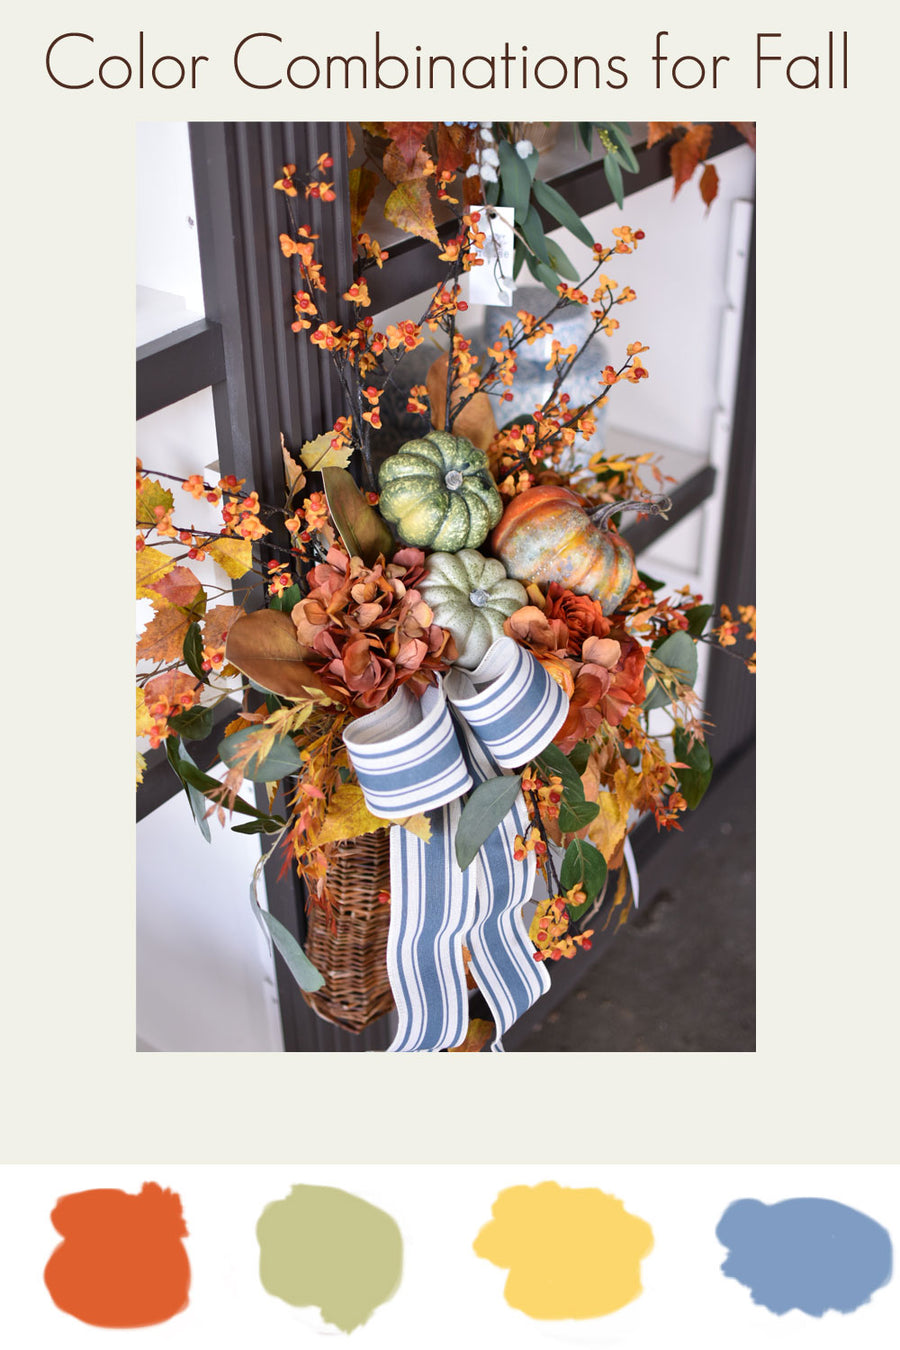 Fall Decorating Inspiration: Color Combinations